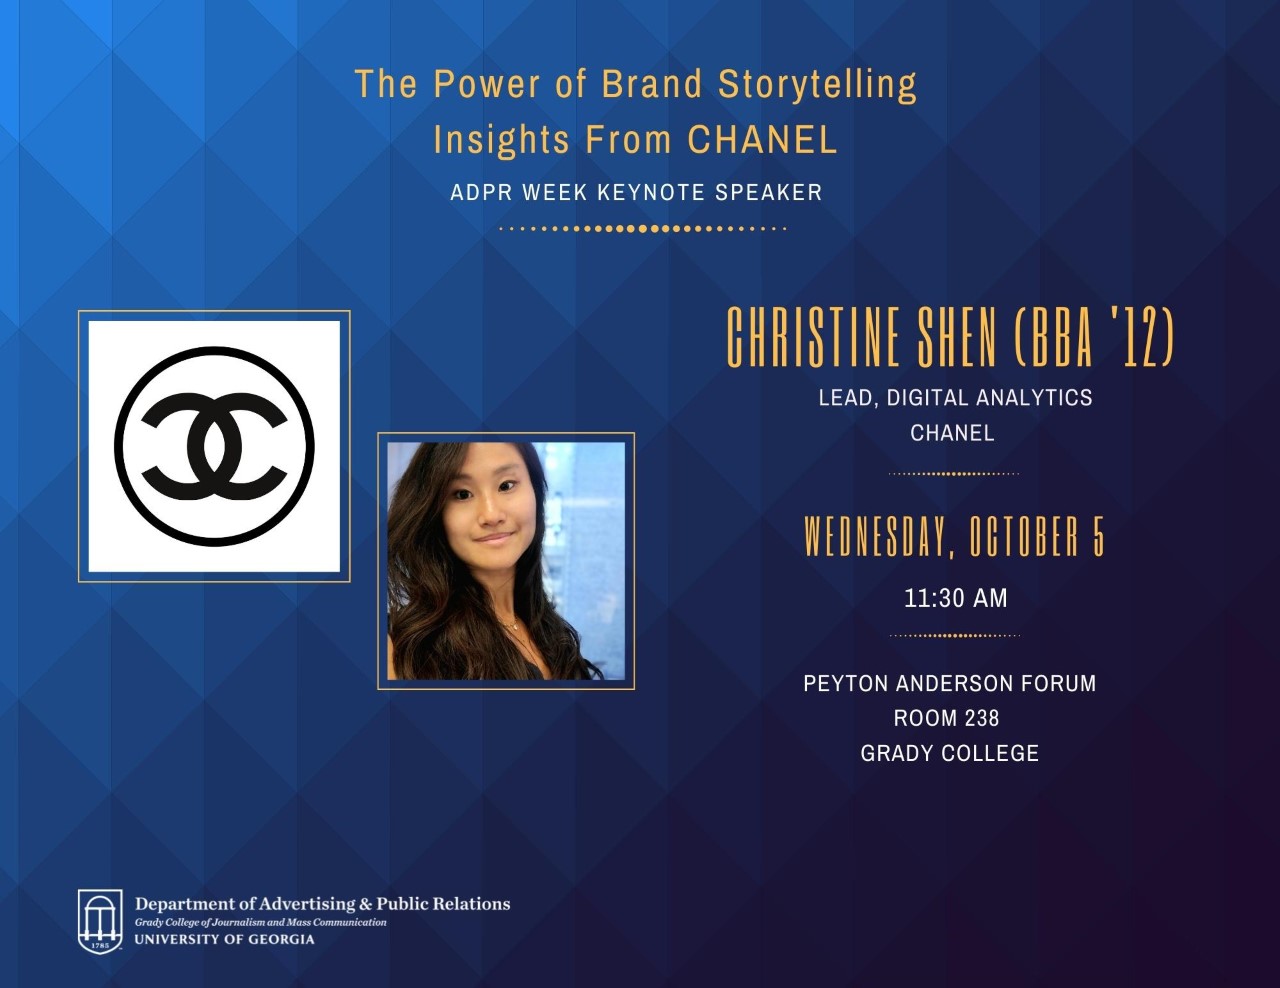 A flyer for Christine Chen's talk titled "The Power of Brand Storytelling: Insights from CHANEL"